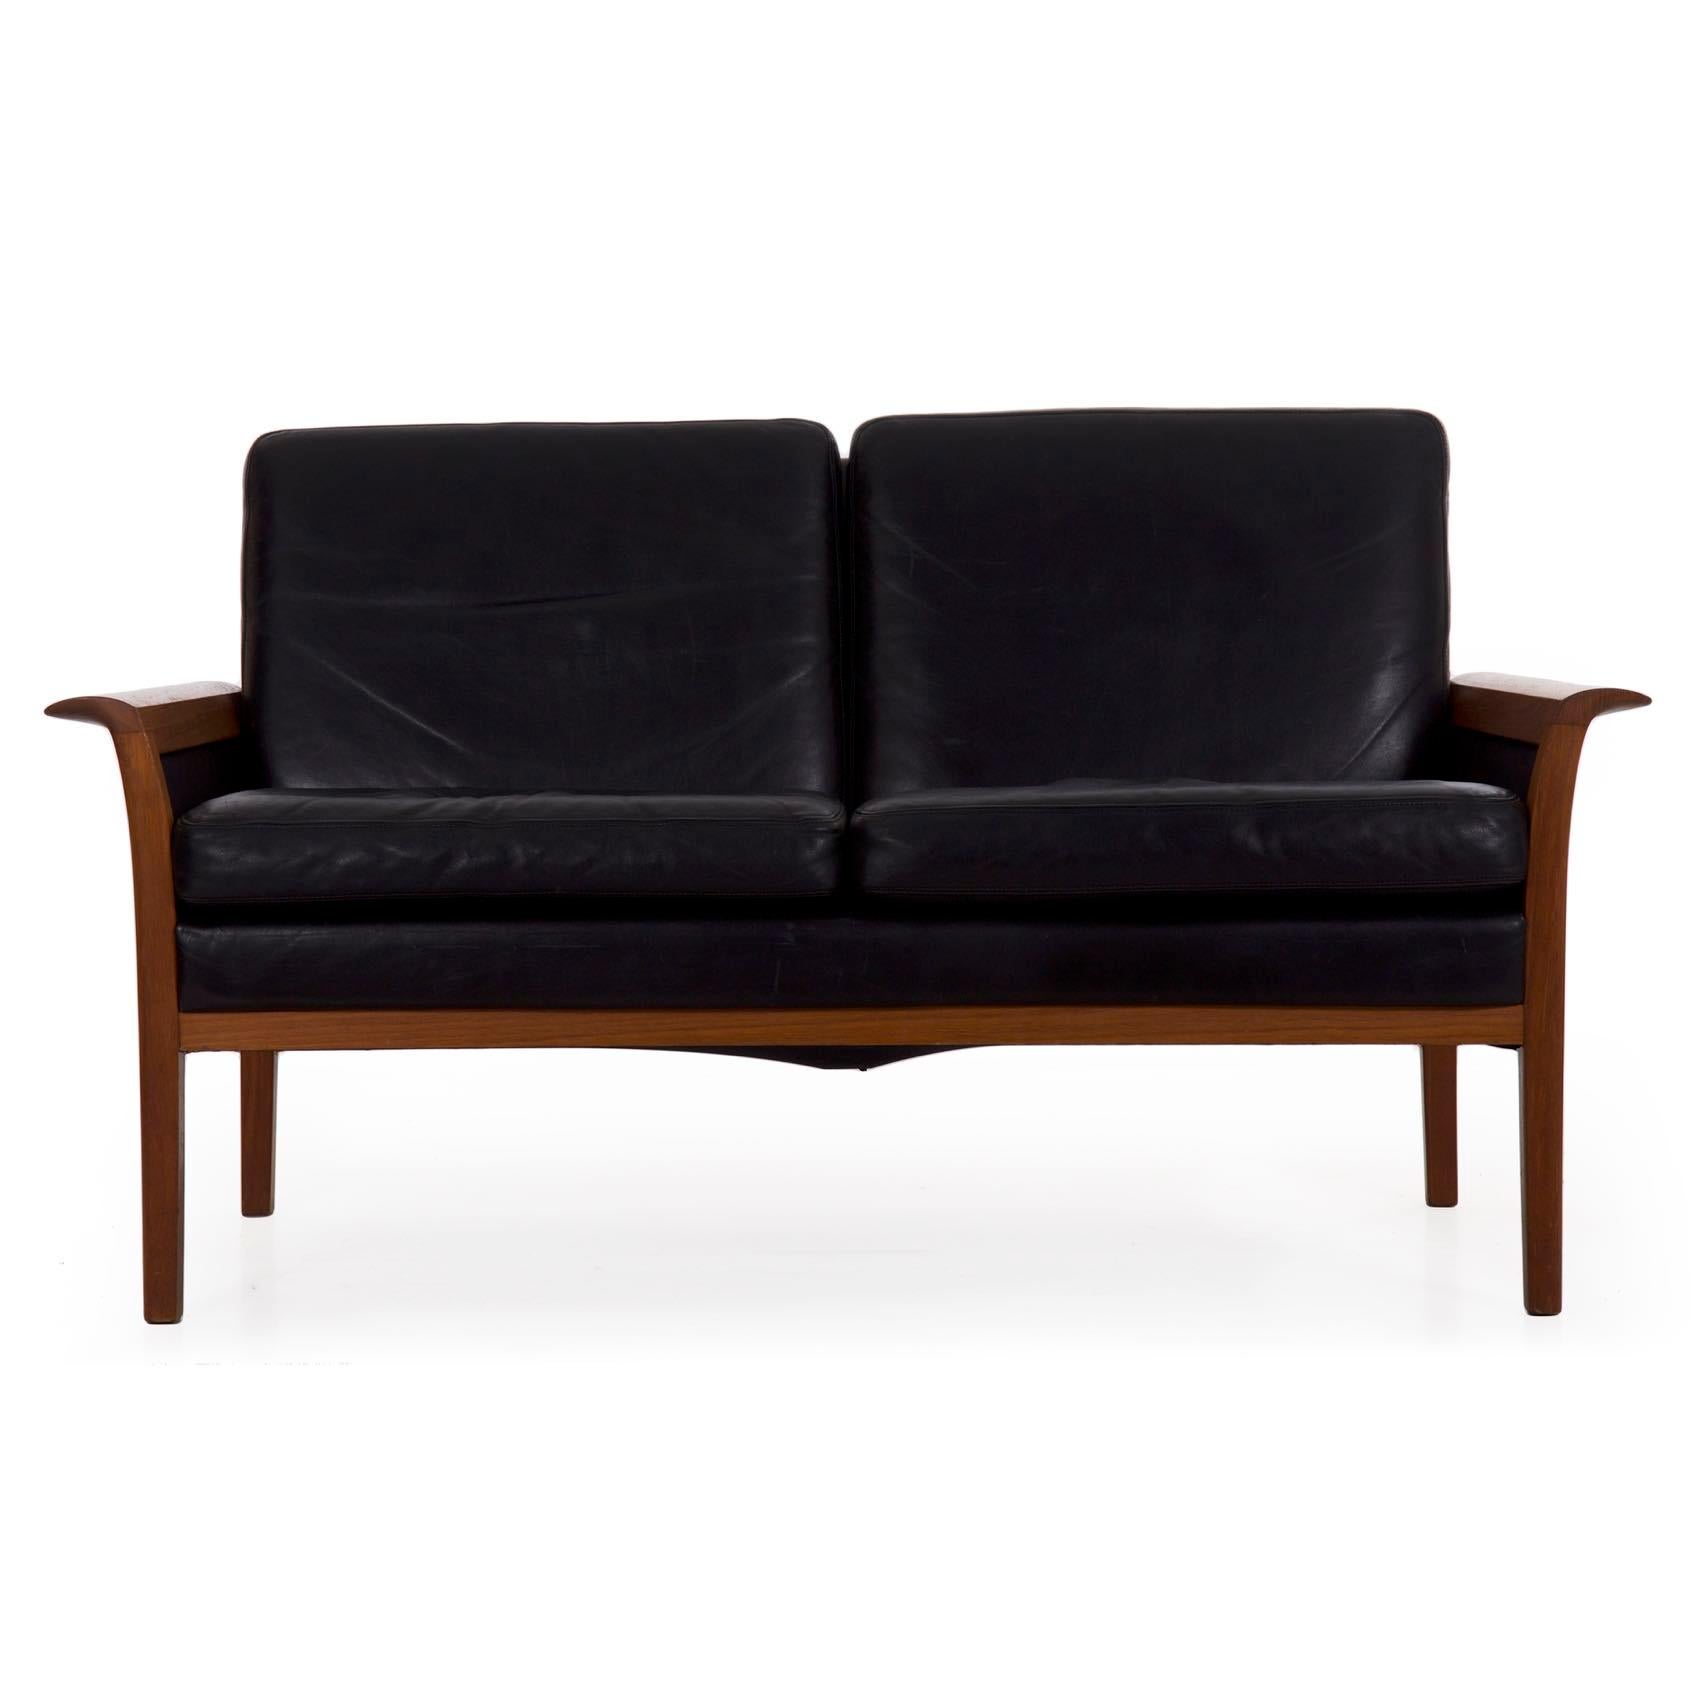 A very attractive two-seater loveseat sofa designed by Hans Olsen and retailed by Vatne Møbler during the third quarter of the 20th century, it retains its original thick black leather upholstery throughout. The sculpted teak frame is particularly